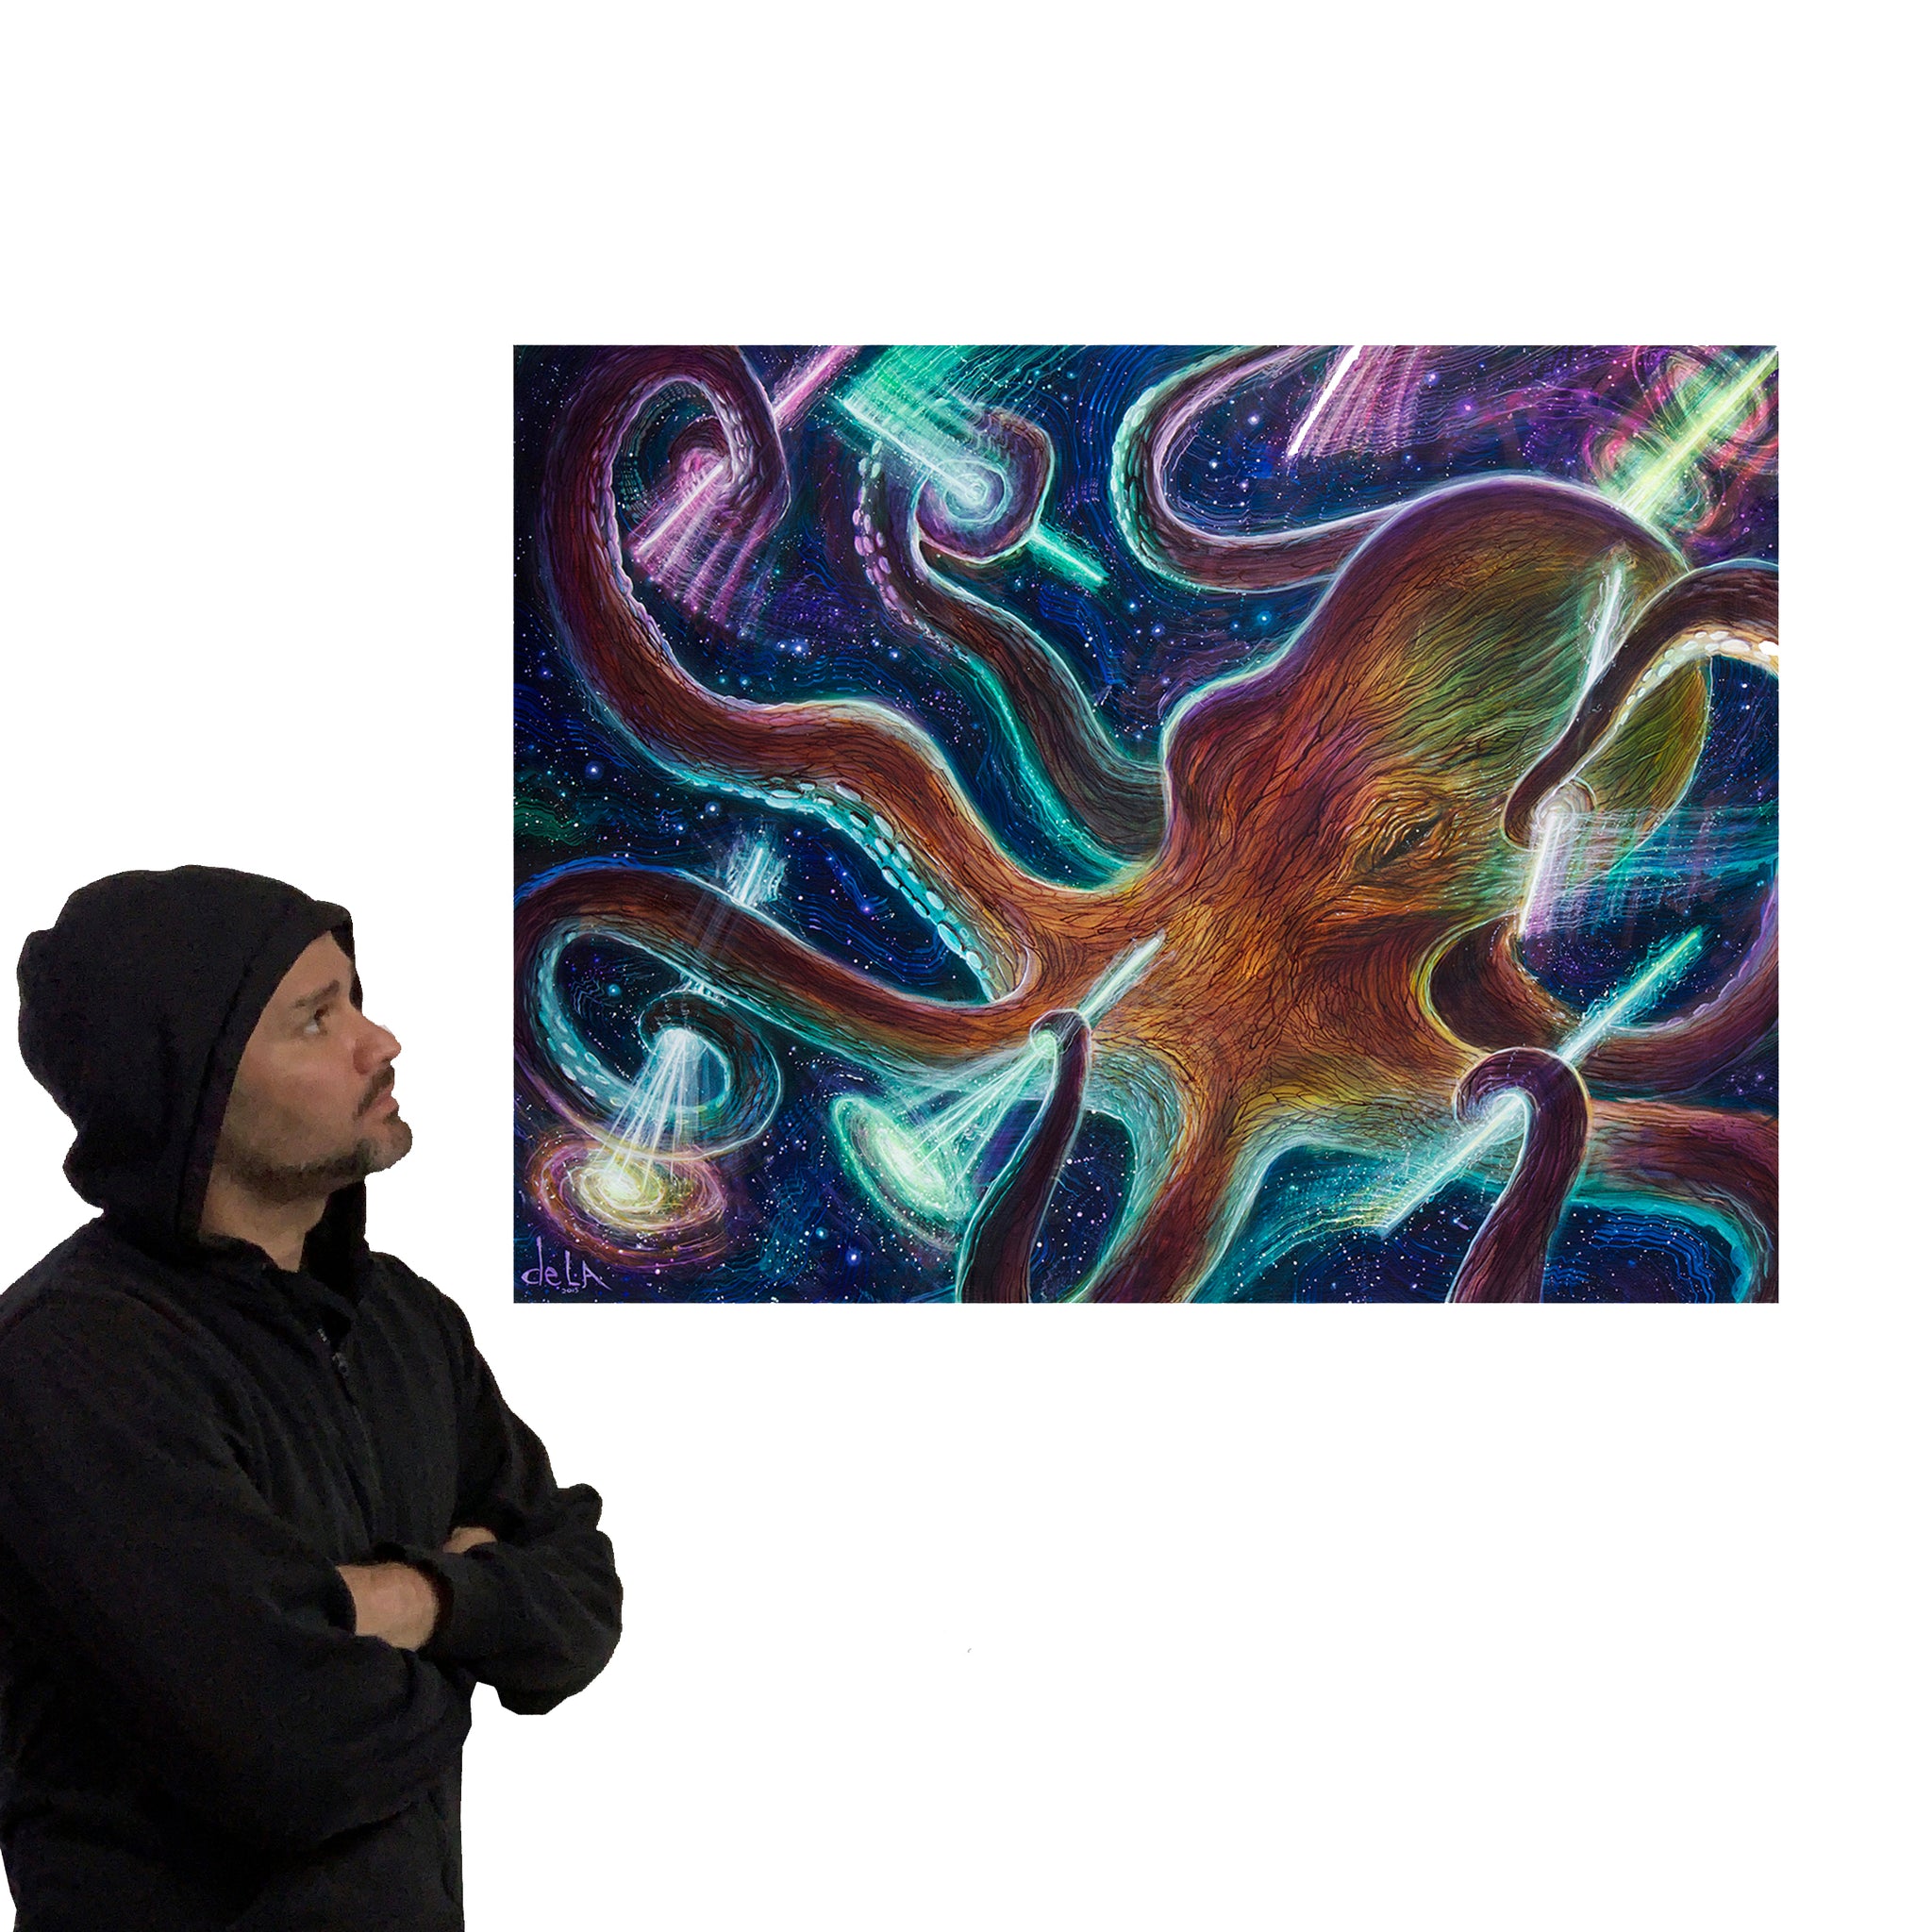 "Drummer Octopus" - Canvas Prints Only